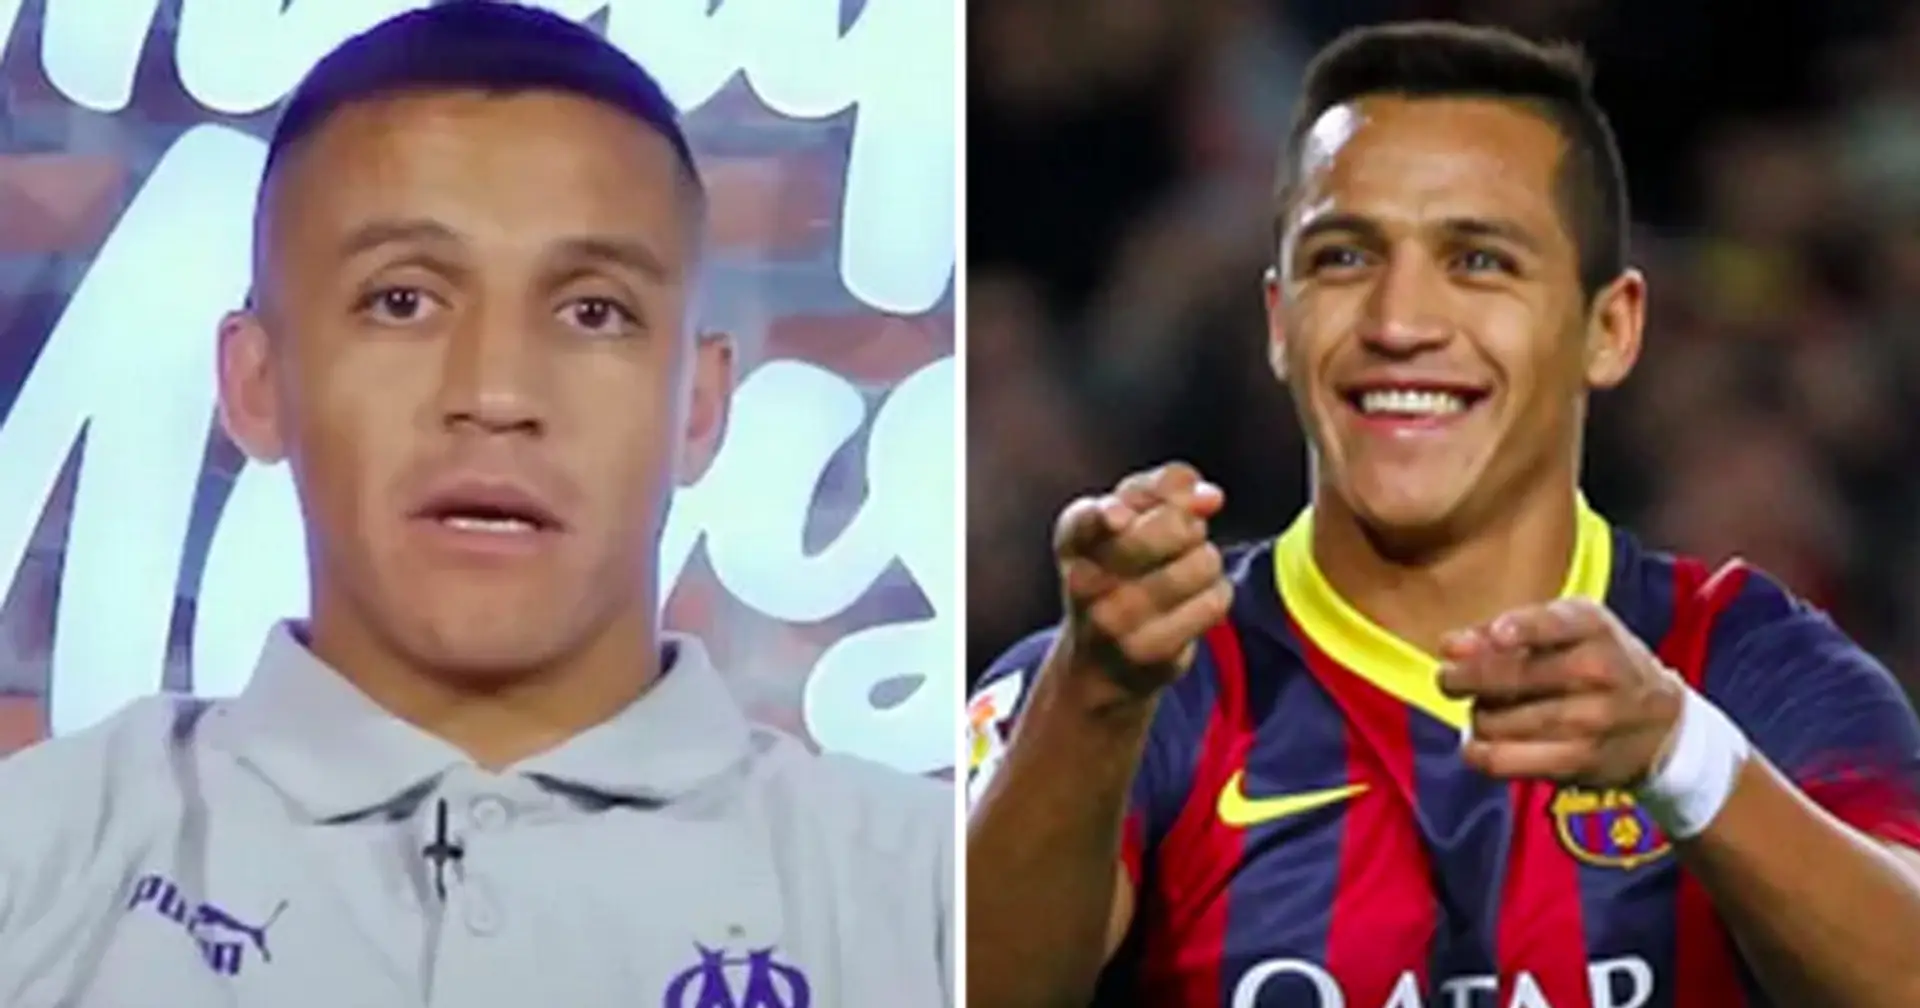 Barca could sign Alexis Sanchez as Dembele replacement (reliability: 3 stars)